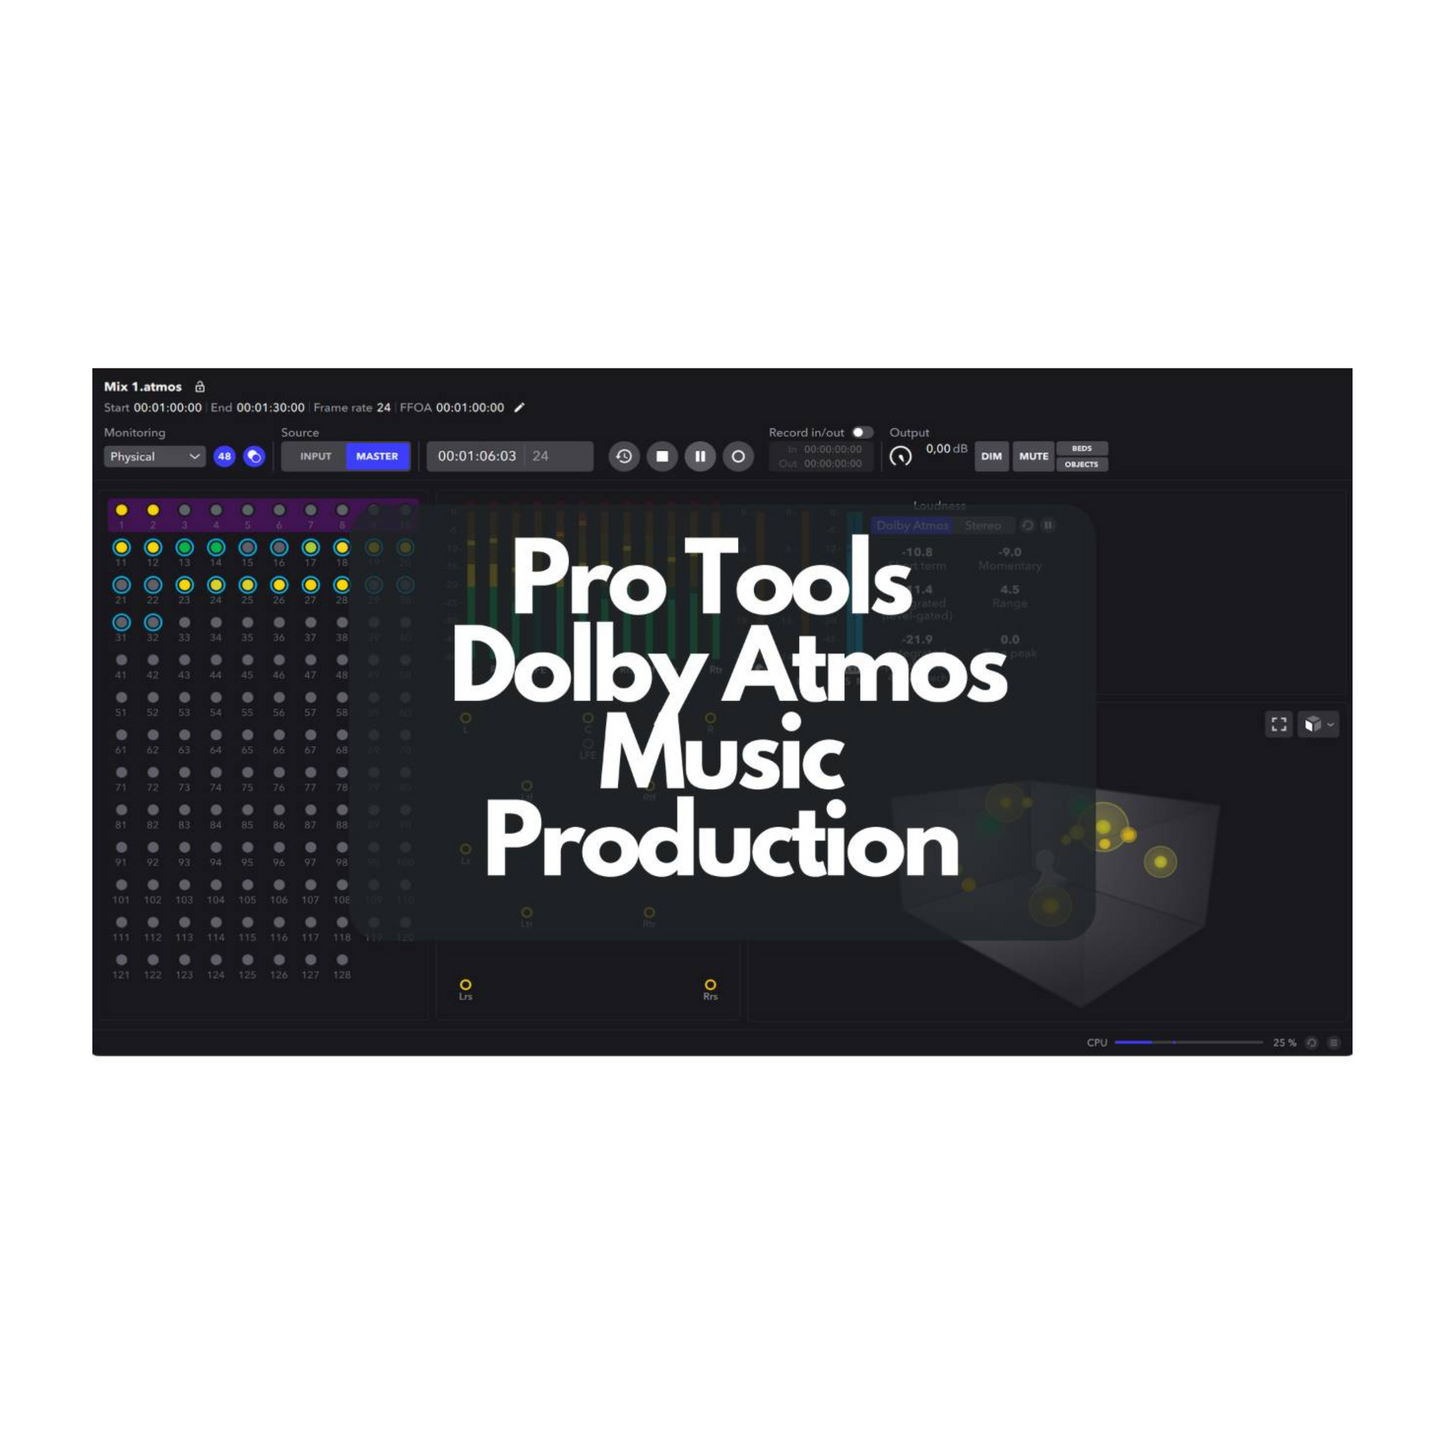 Pro Tools Dolby Atmos Music Production Course